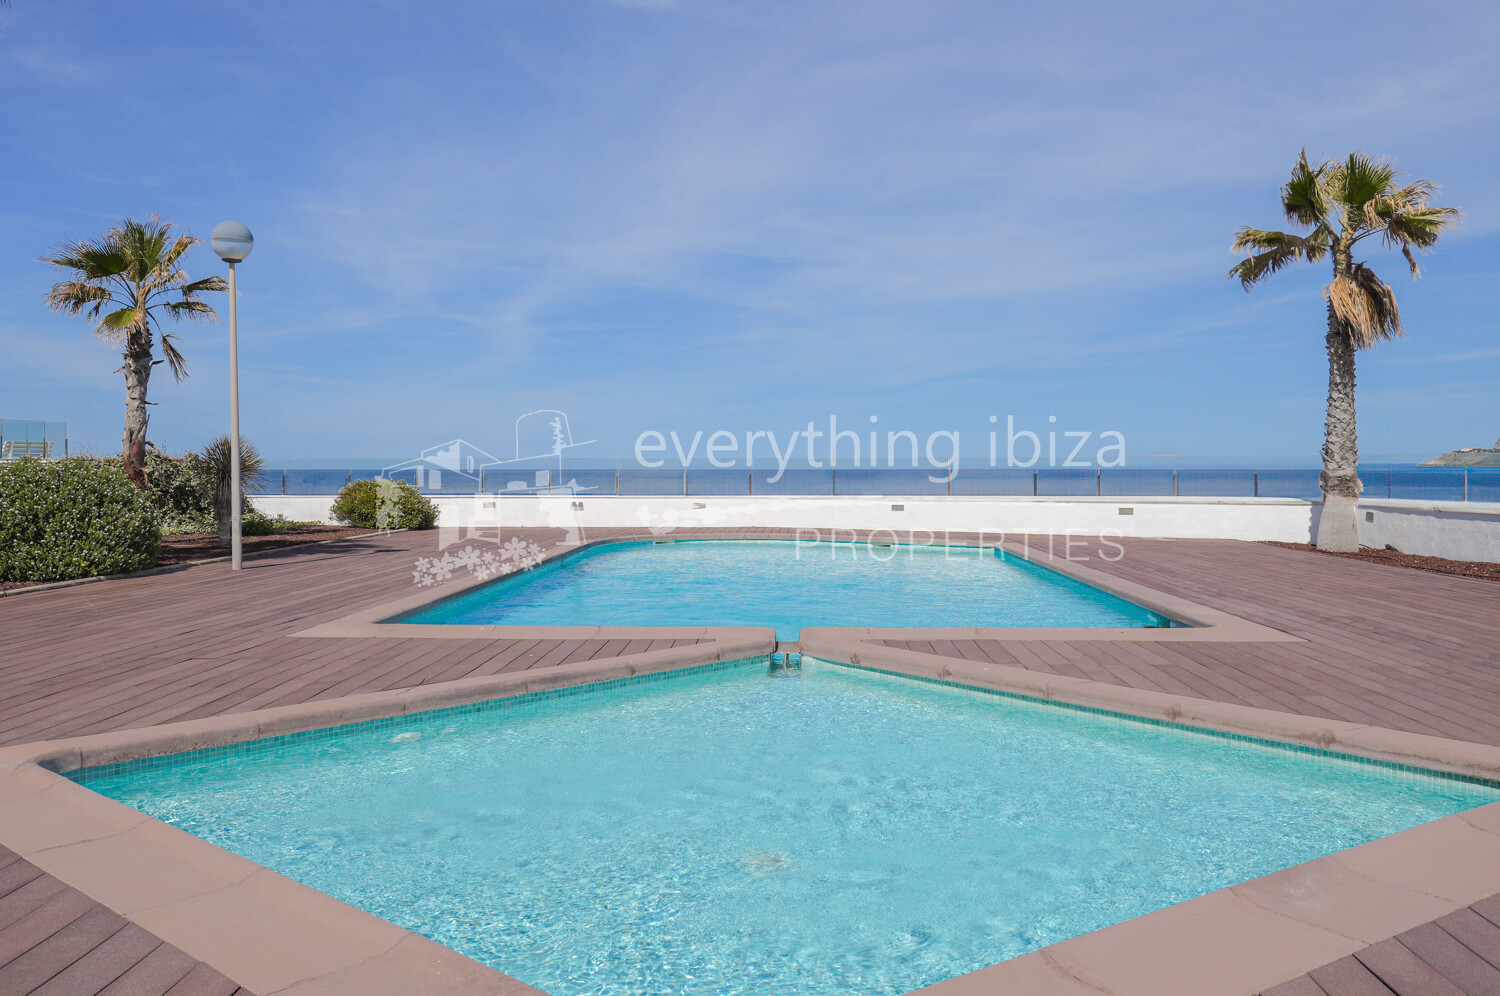 Stylish Modern Contemporary Apartment Close to the Sea & Coastline, ref. 1723, for sale in Ibiza by everything ibiza Properties